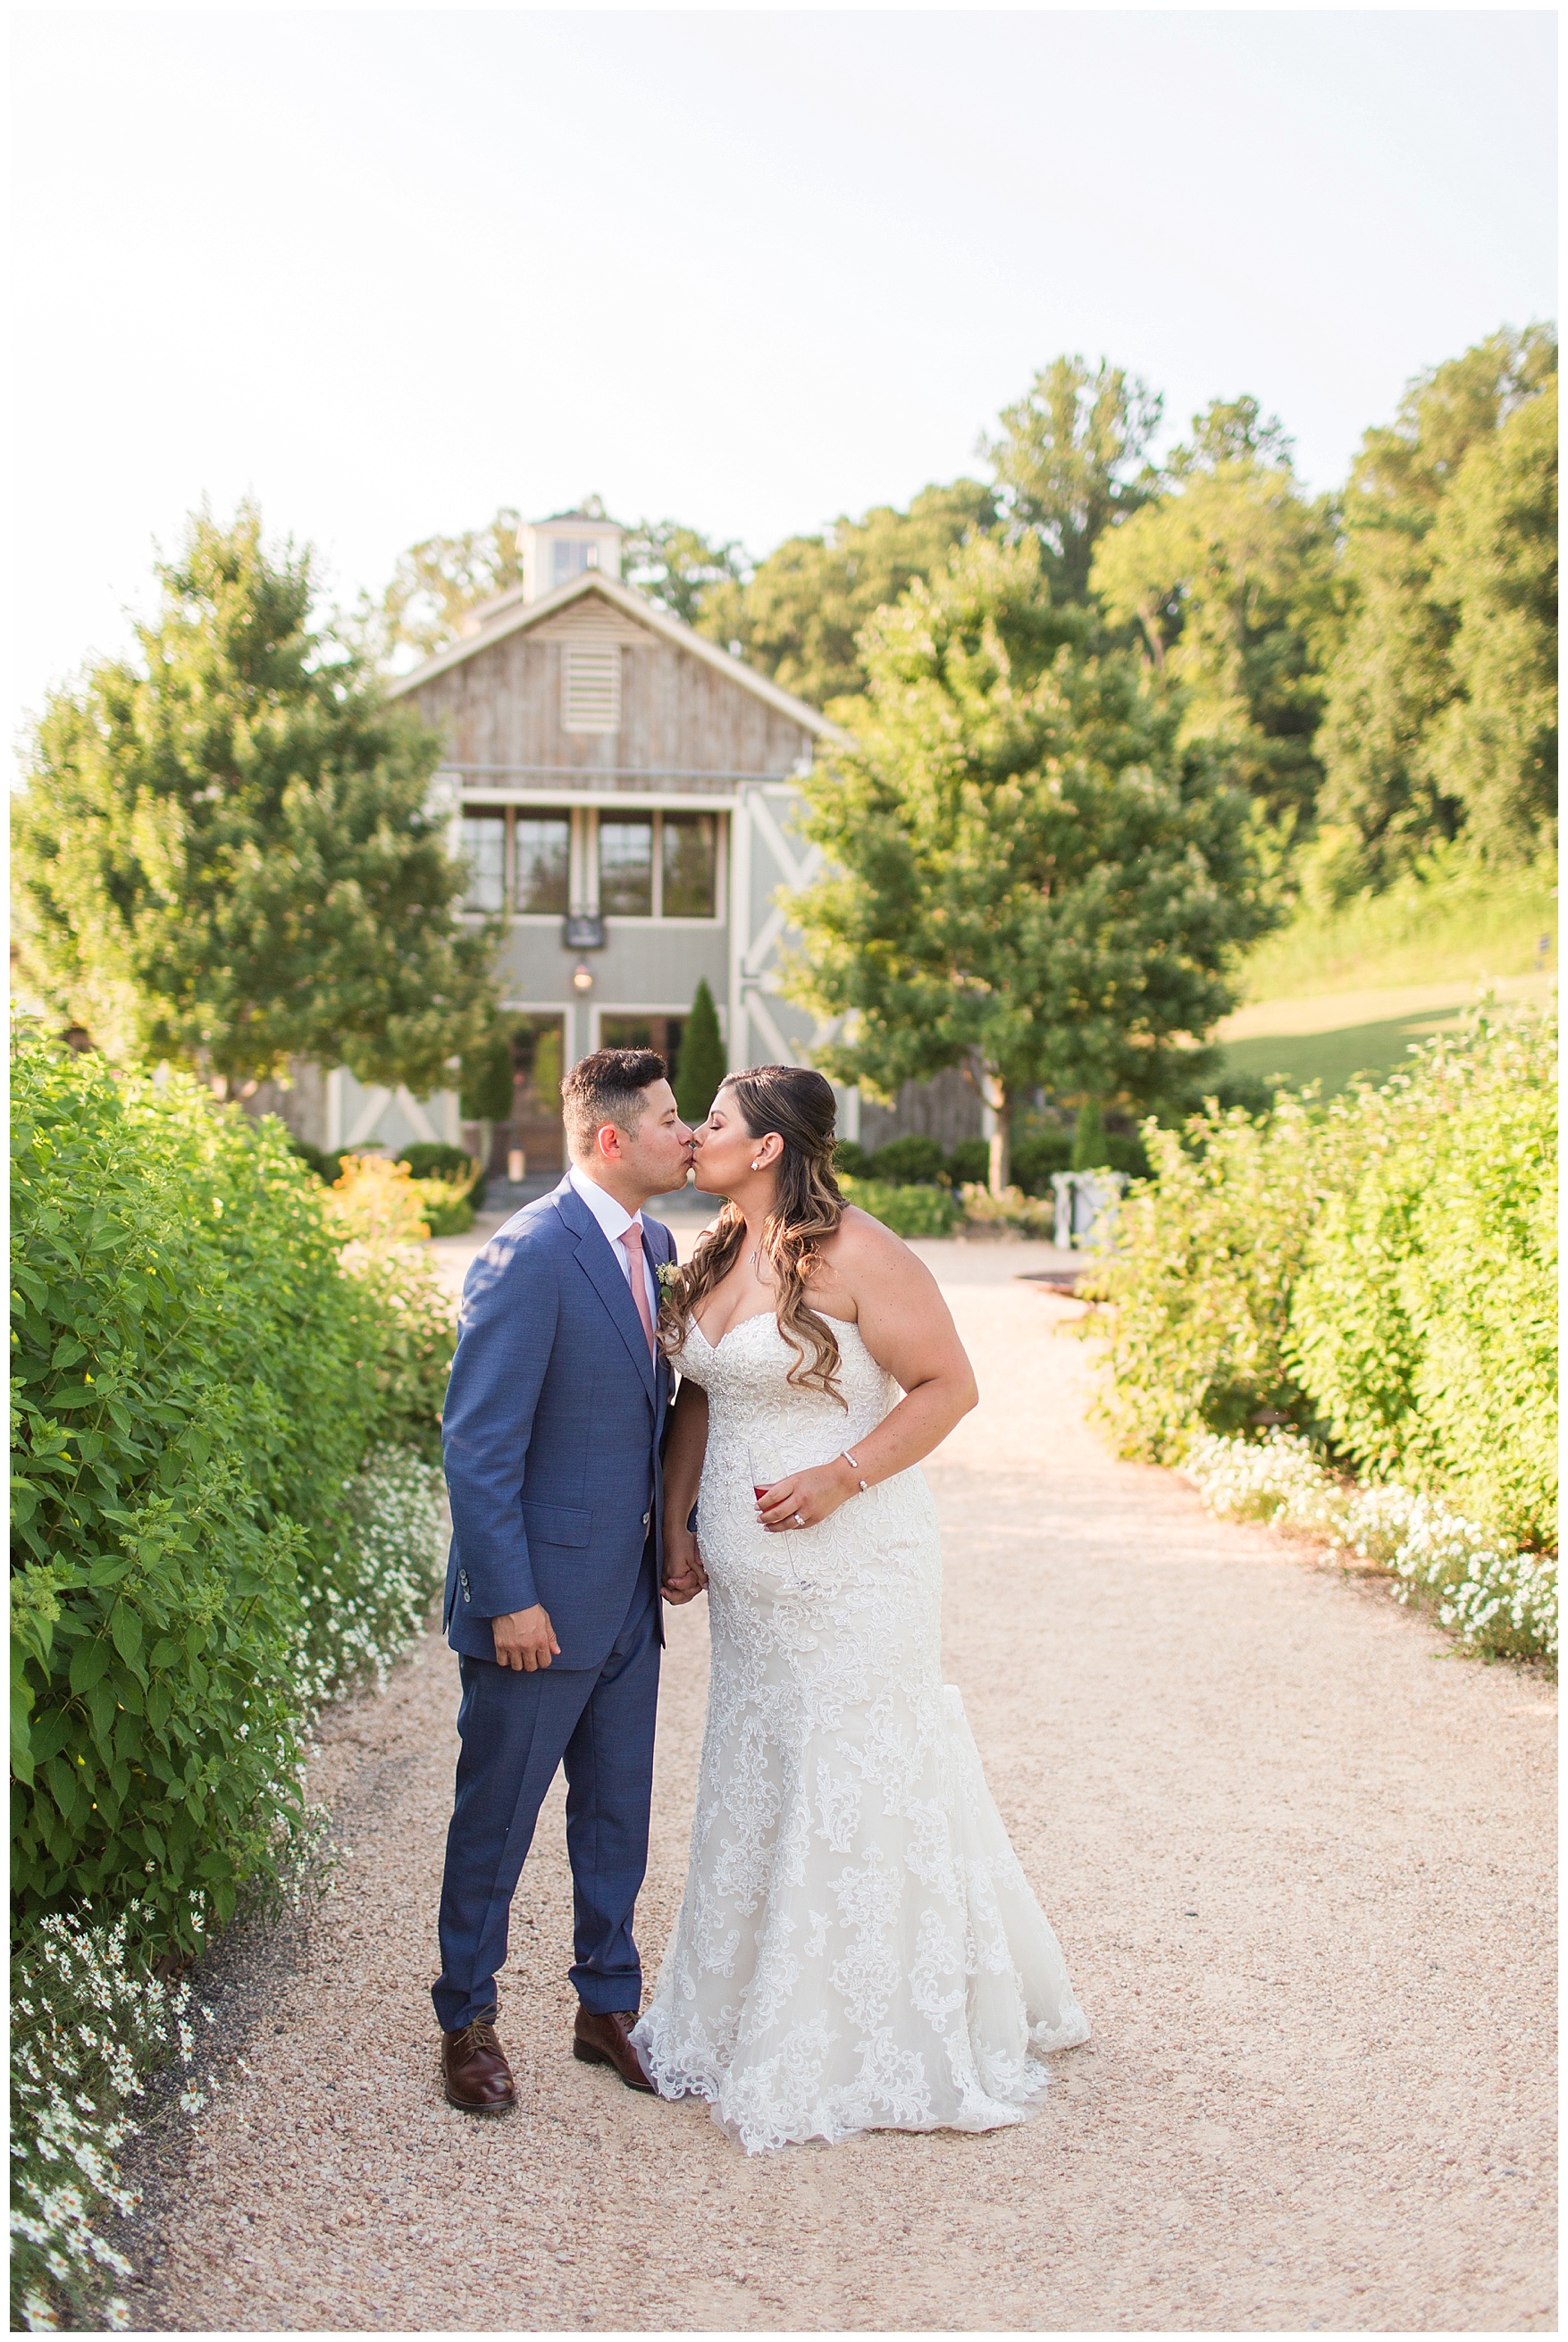 Wedding at Pippin Hill Farm and Vineyards in Charlottesville, Virginia || Central Virginia Wedding Photographer 